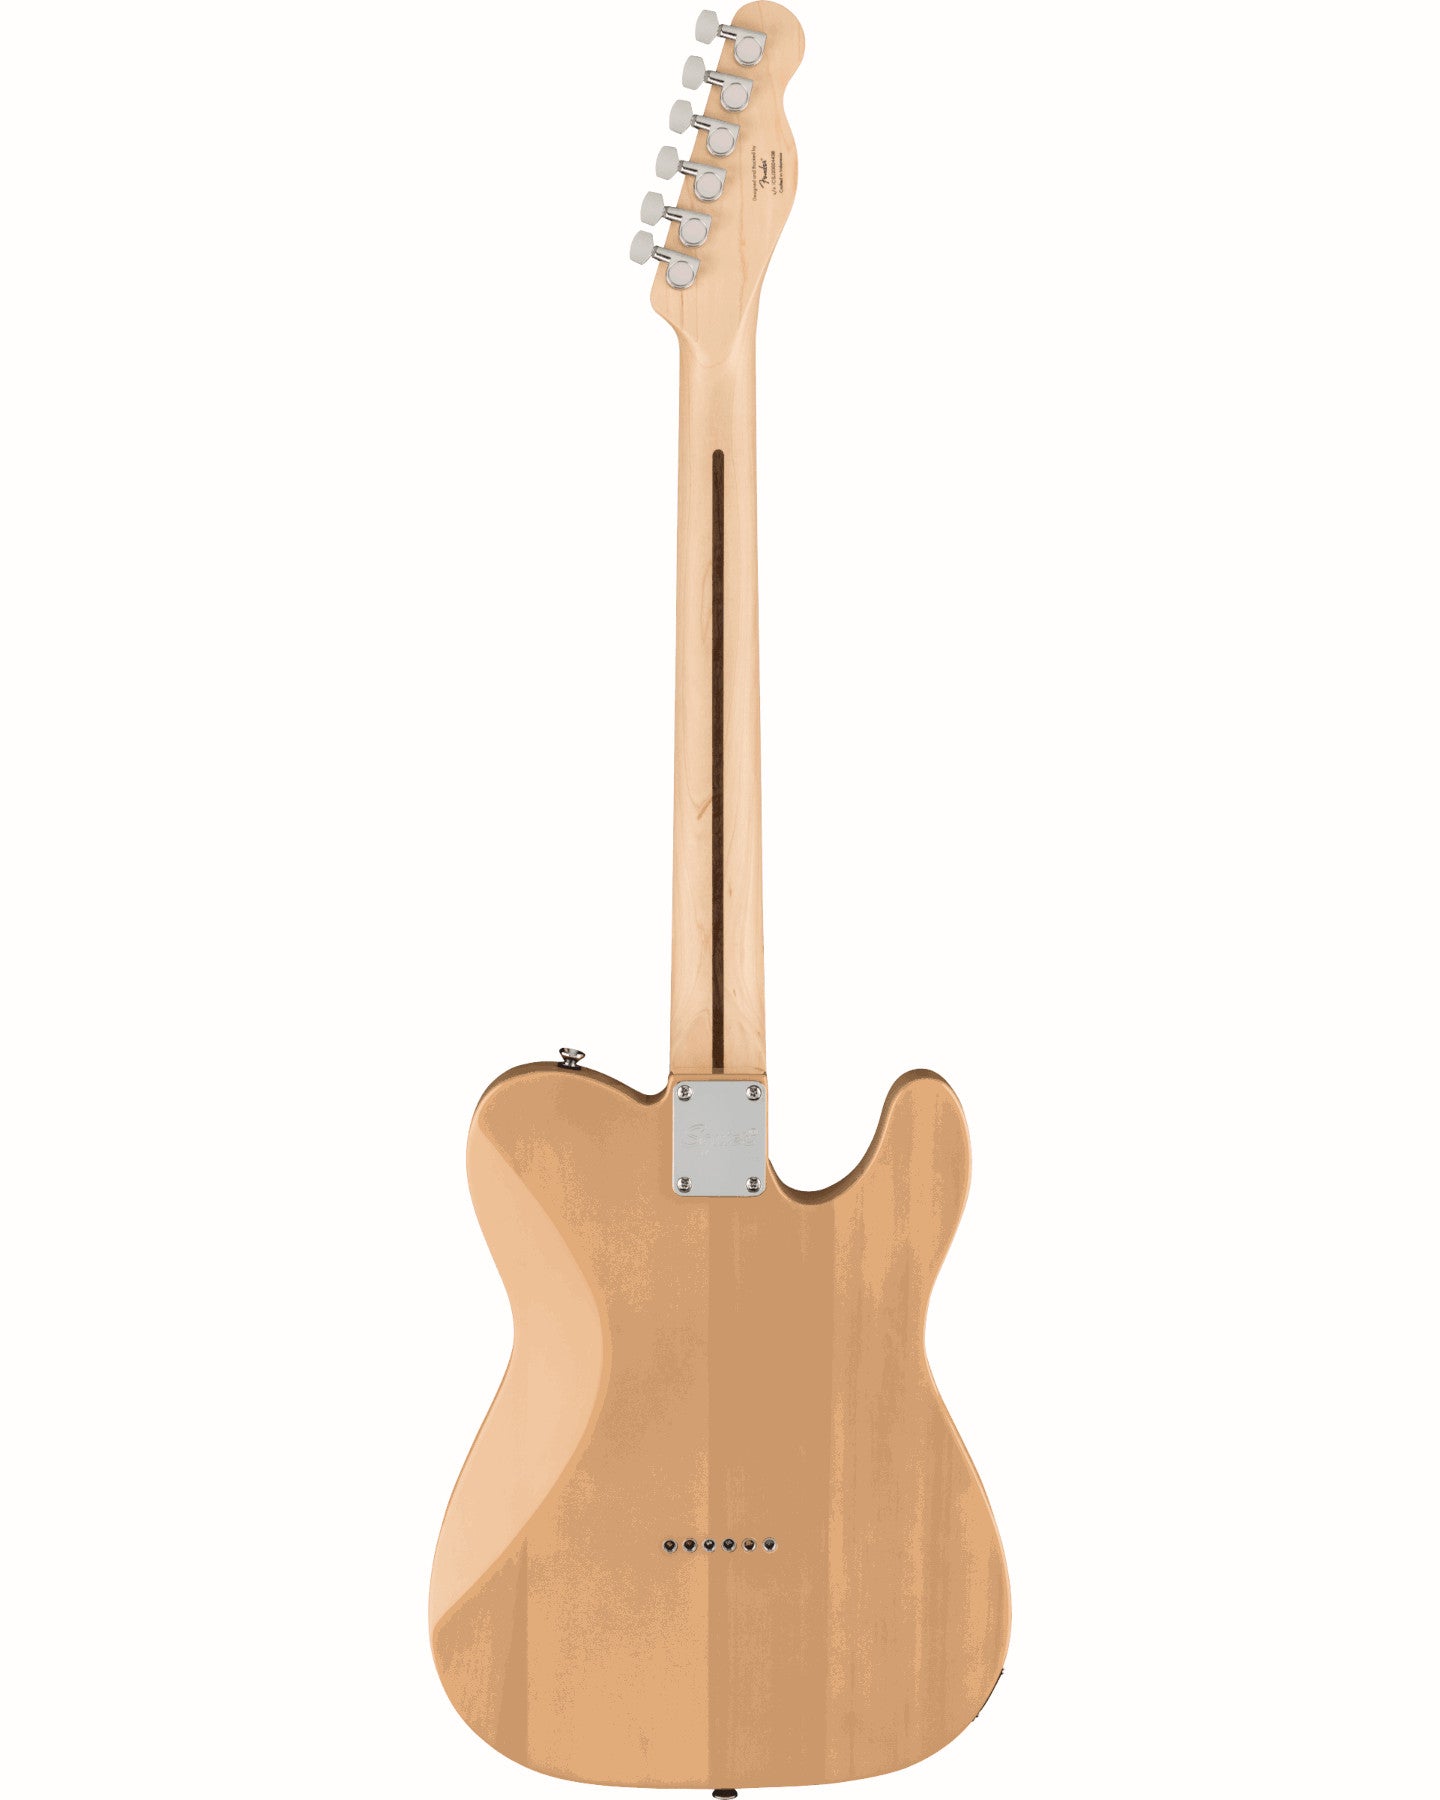 Affinity Series Telecaster, LH Maple Fingerboard